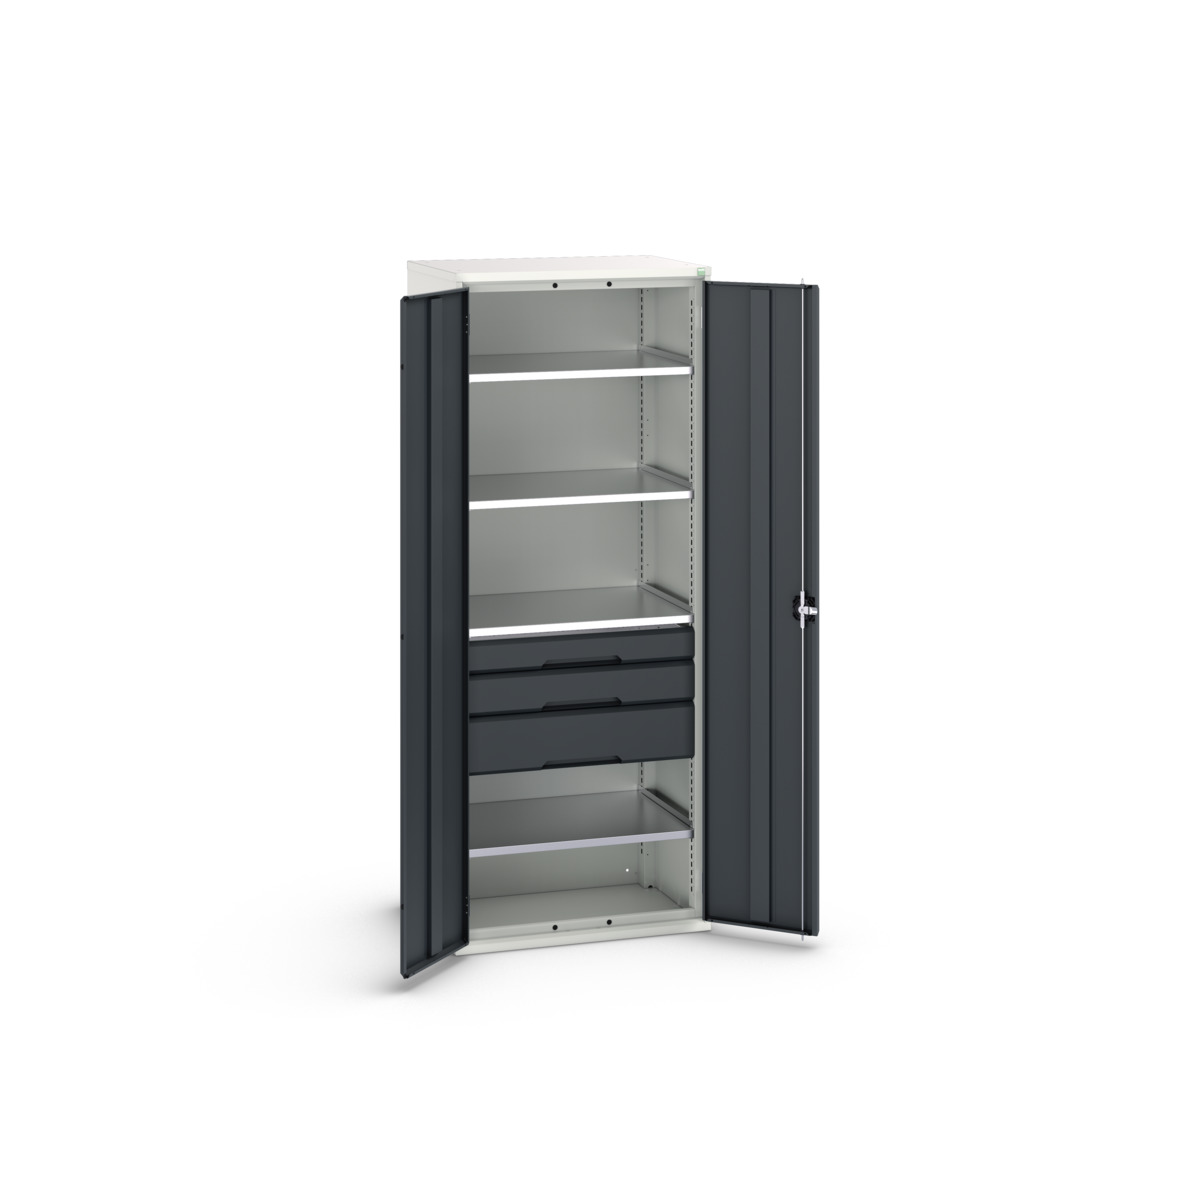 16926456. - verso kitted cupboard